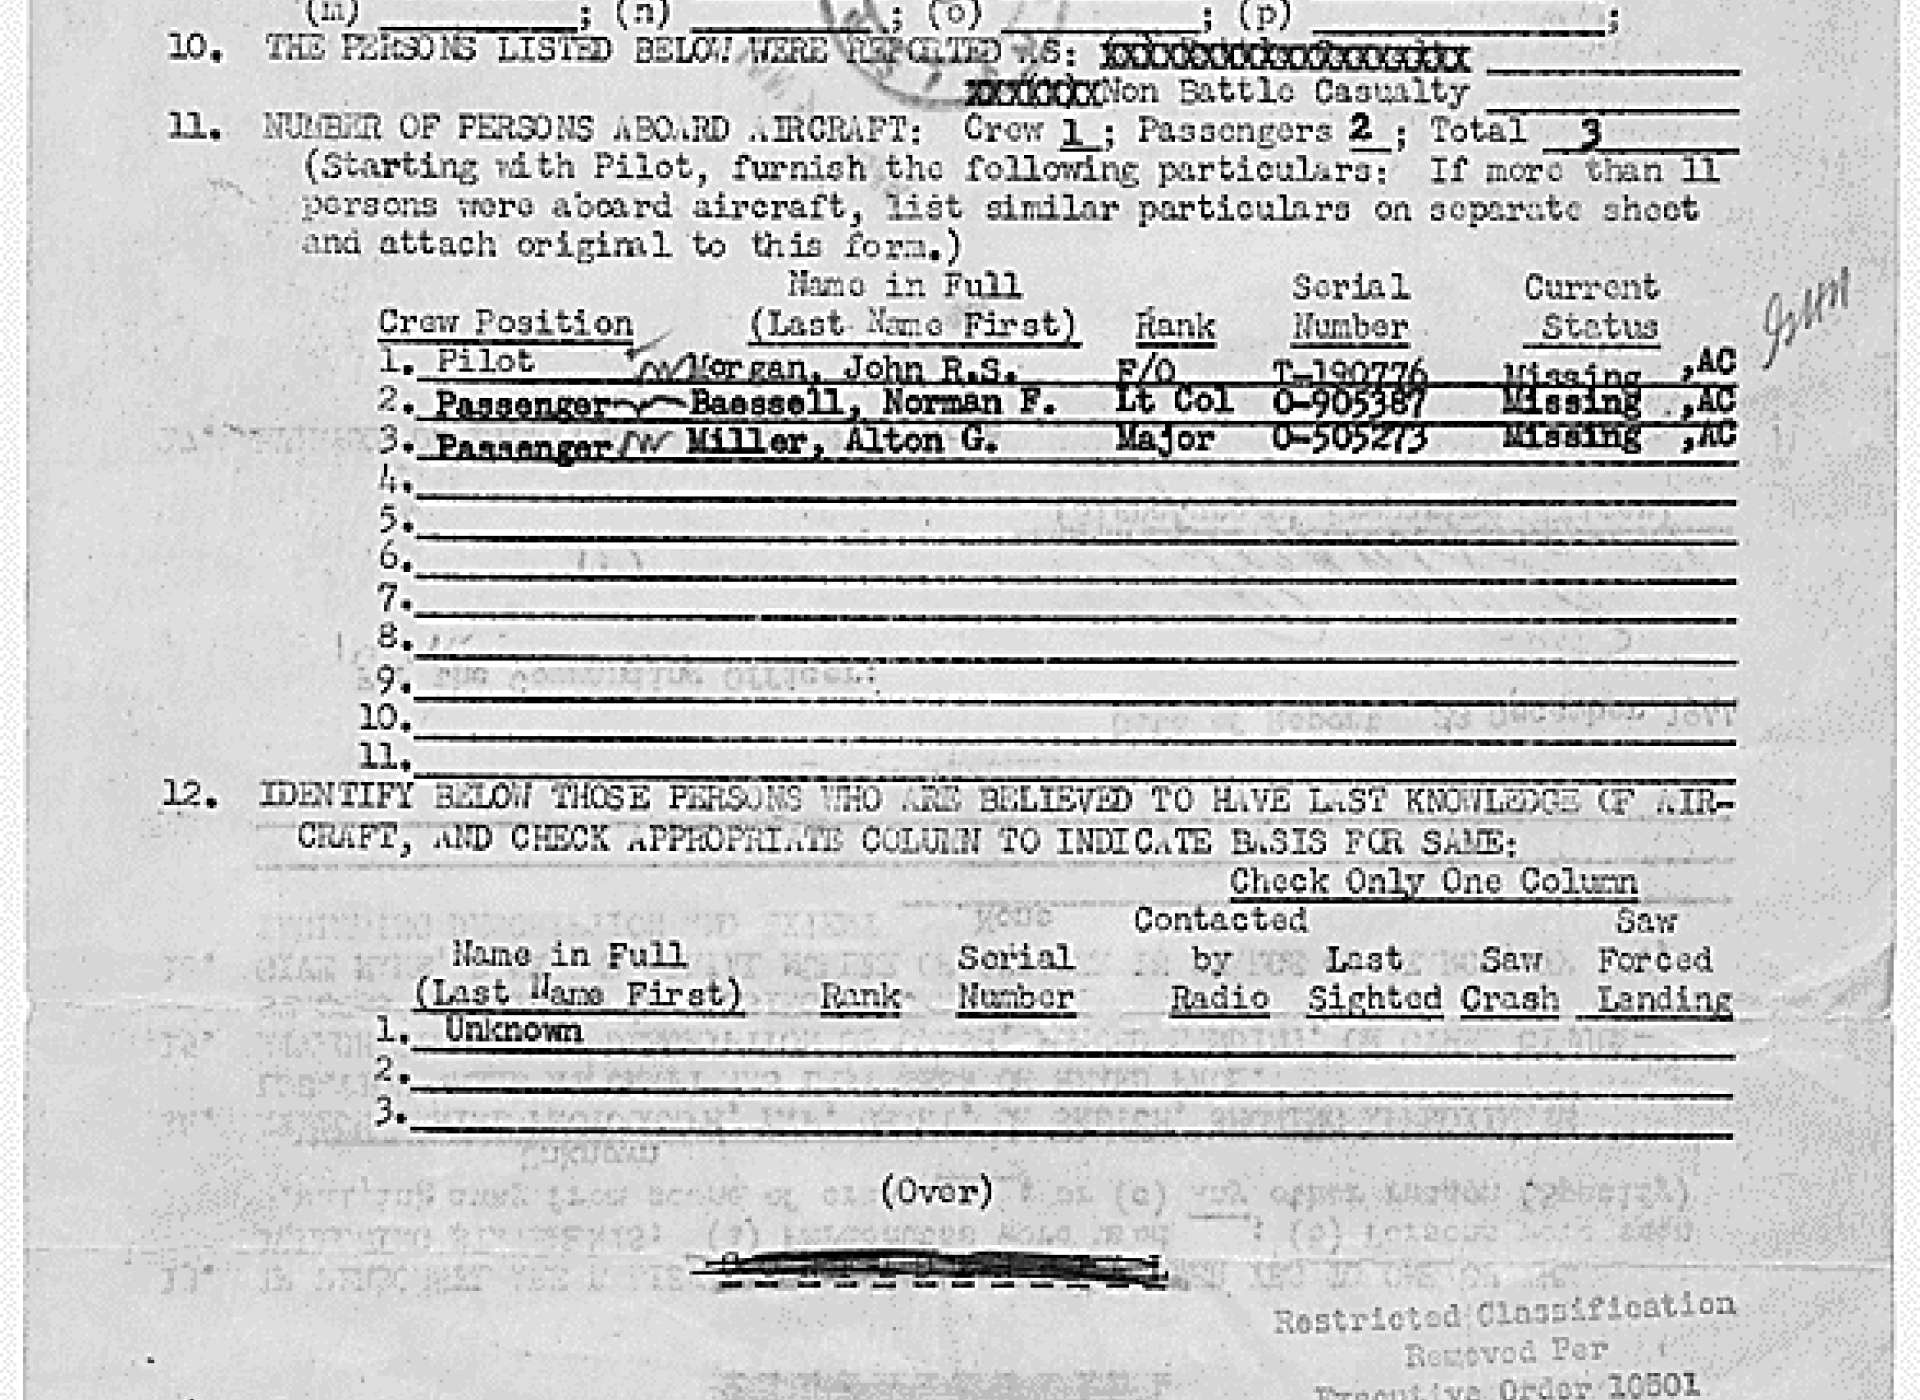 The bottom page from the Missing Air Crew Report, amended to add Miller and Baessell as passengers. Missing Air Crew Report No. 44-70285, the National Archives via Fold3.